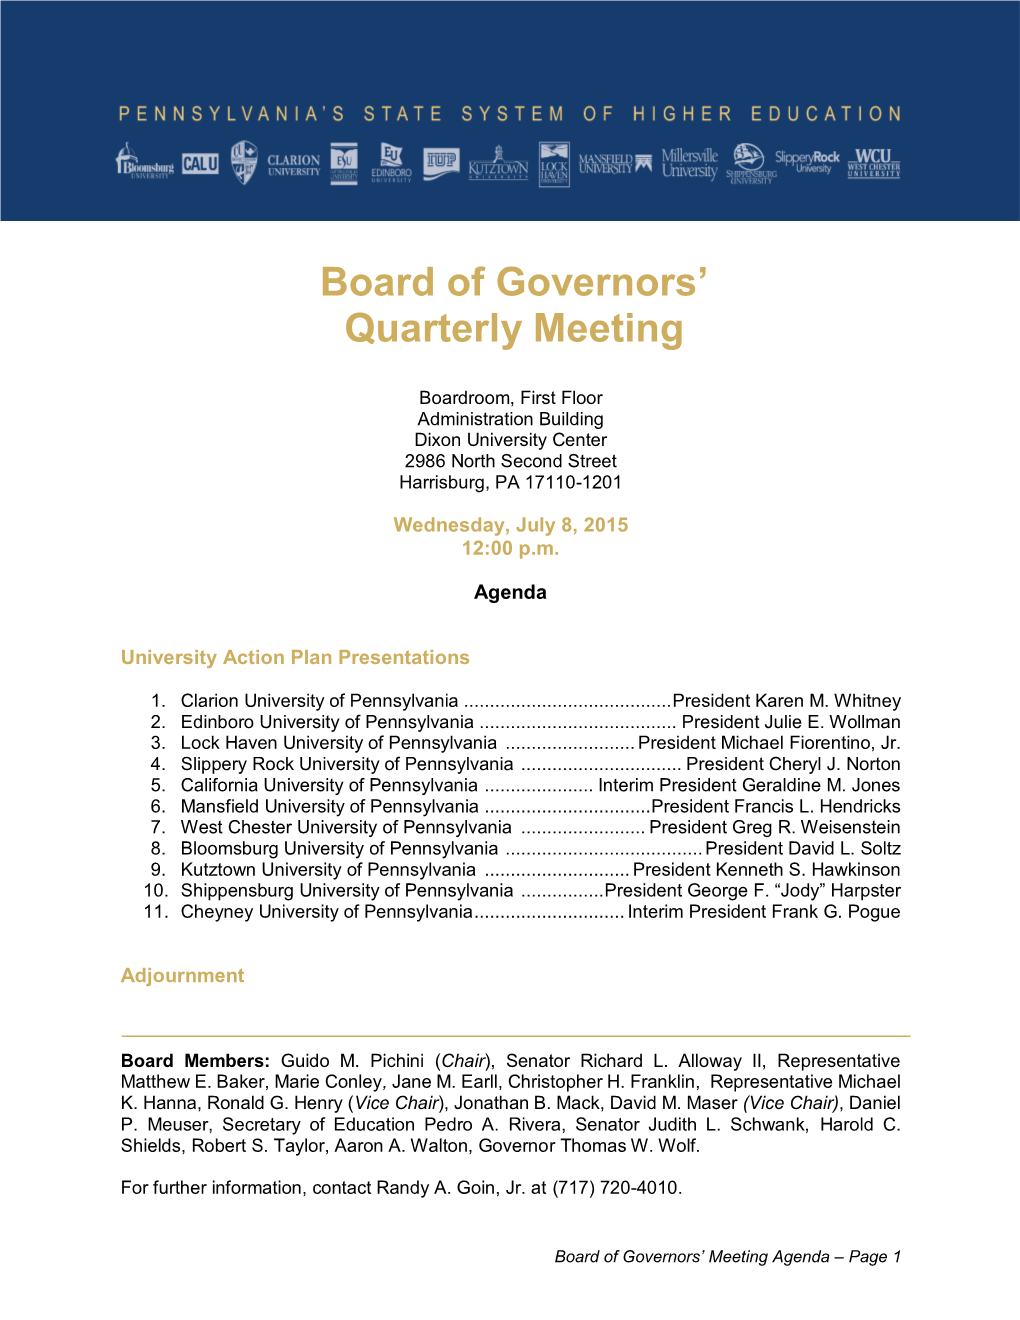 Board of Governors' Quarterly Meeting